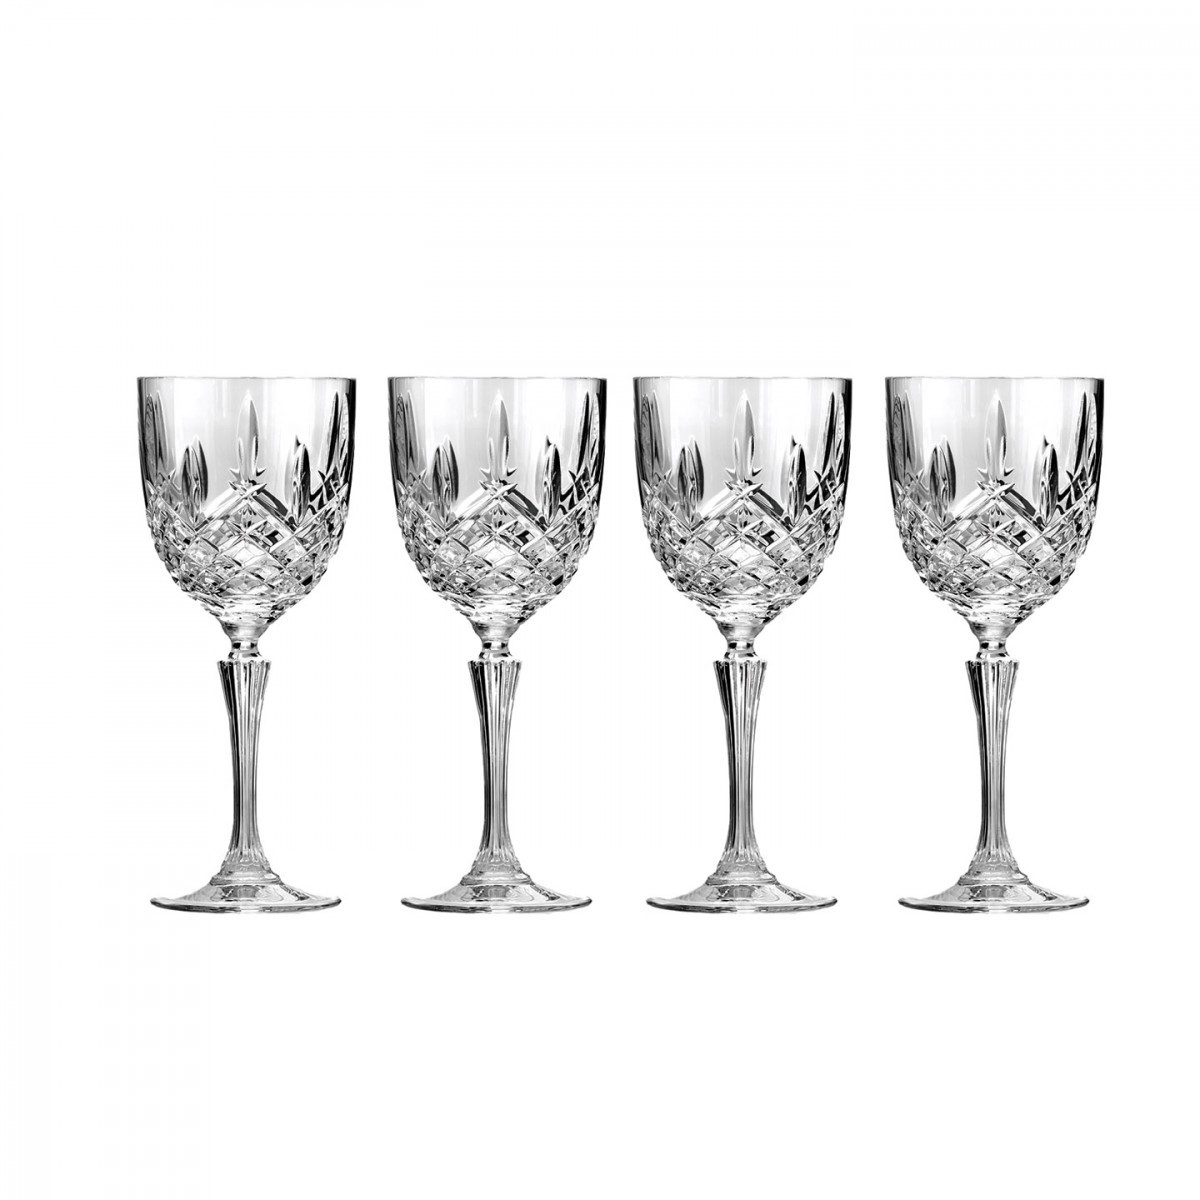 30 Great Marquis by Waterford Rainfall Vase 11 2024 free download marquis by waterford rainfall vase 11 of markham wine set of 4 marquis by waterford us inside markham wine set of 4